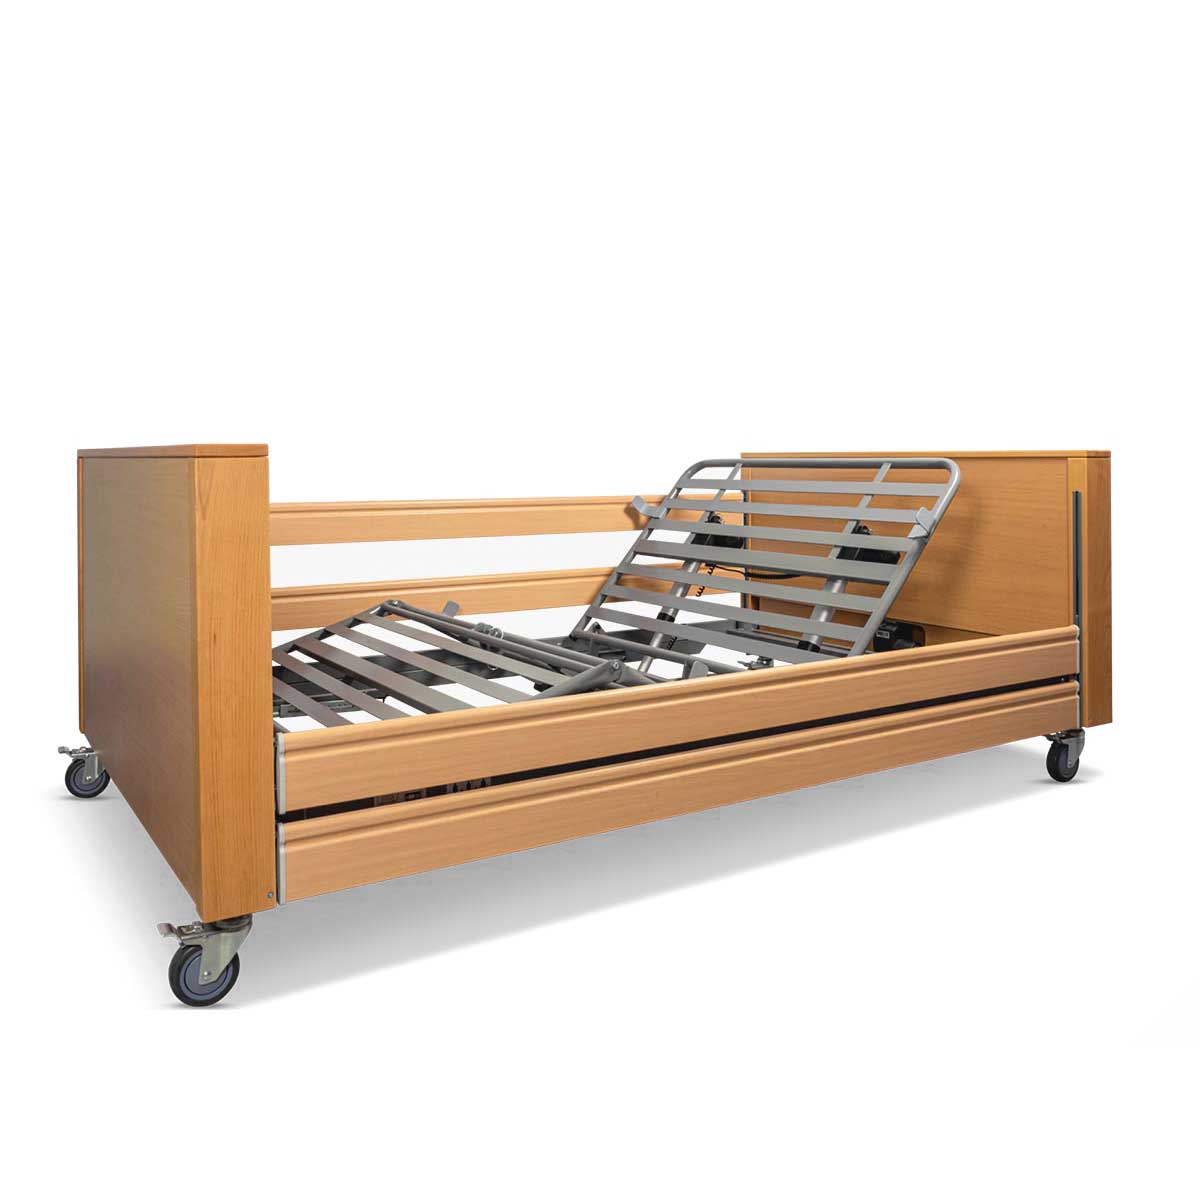 Ecofit Xtra care bed, including upright